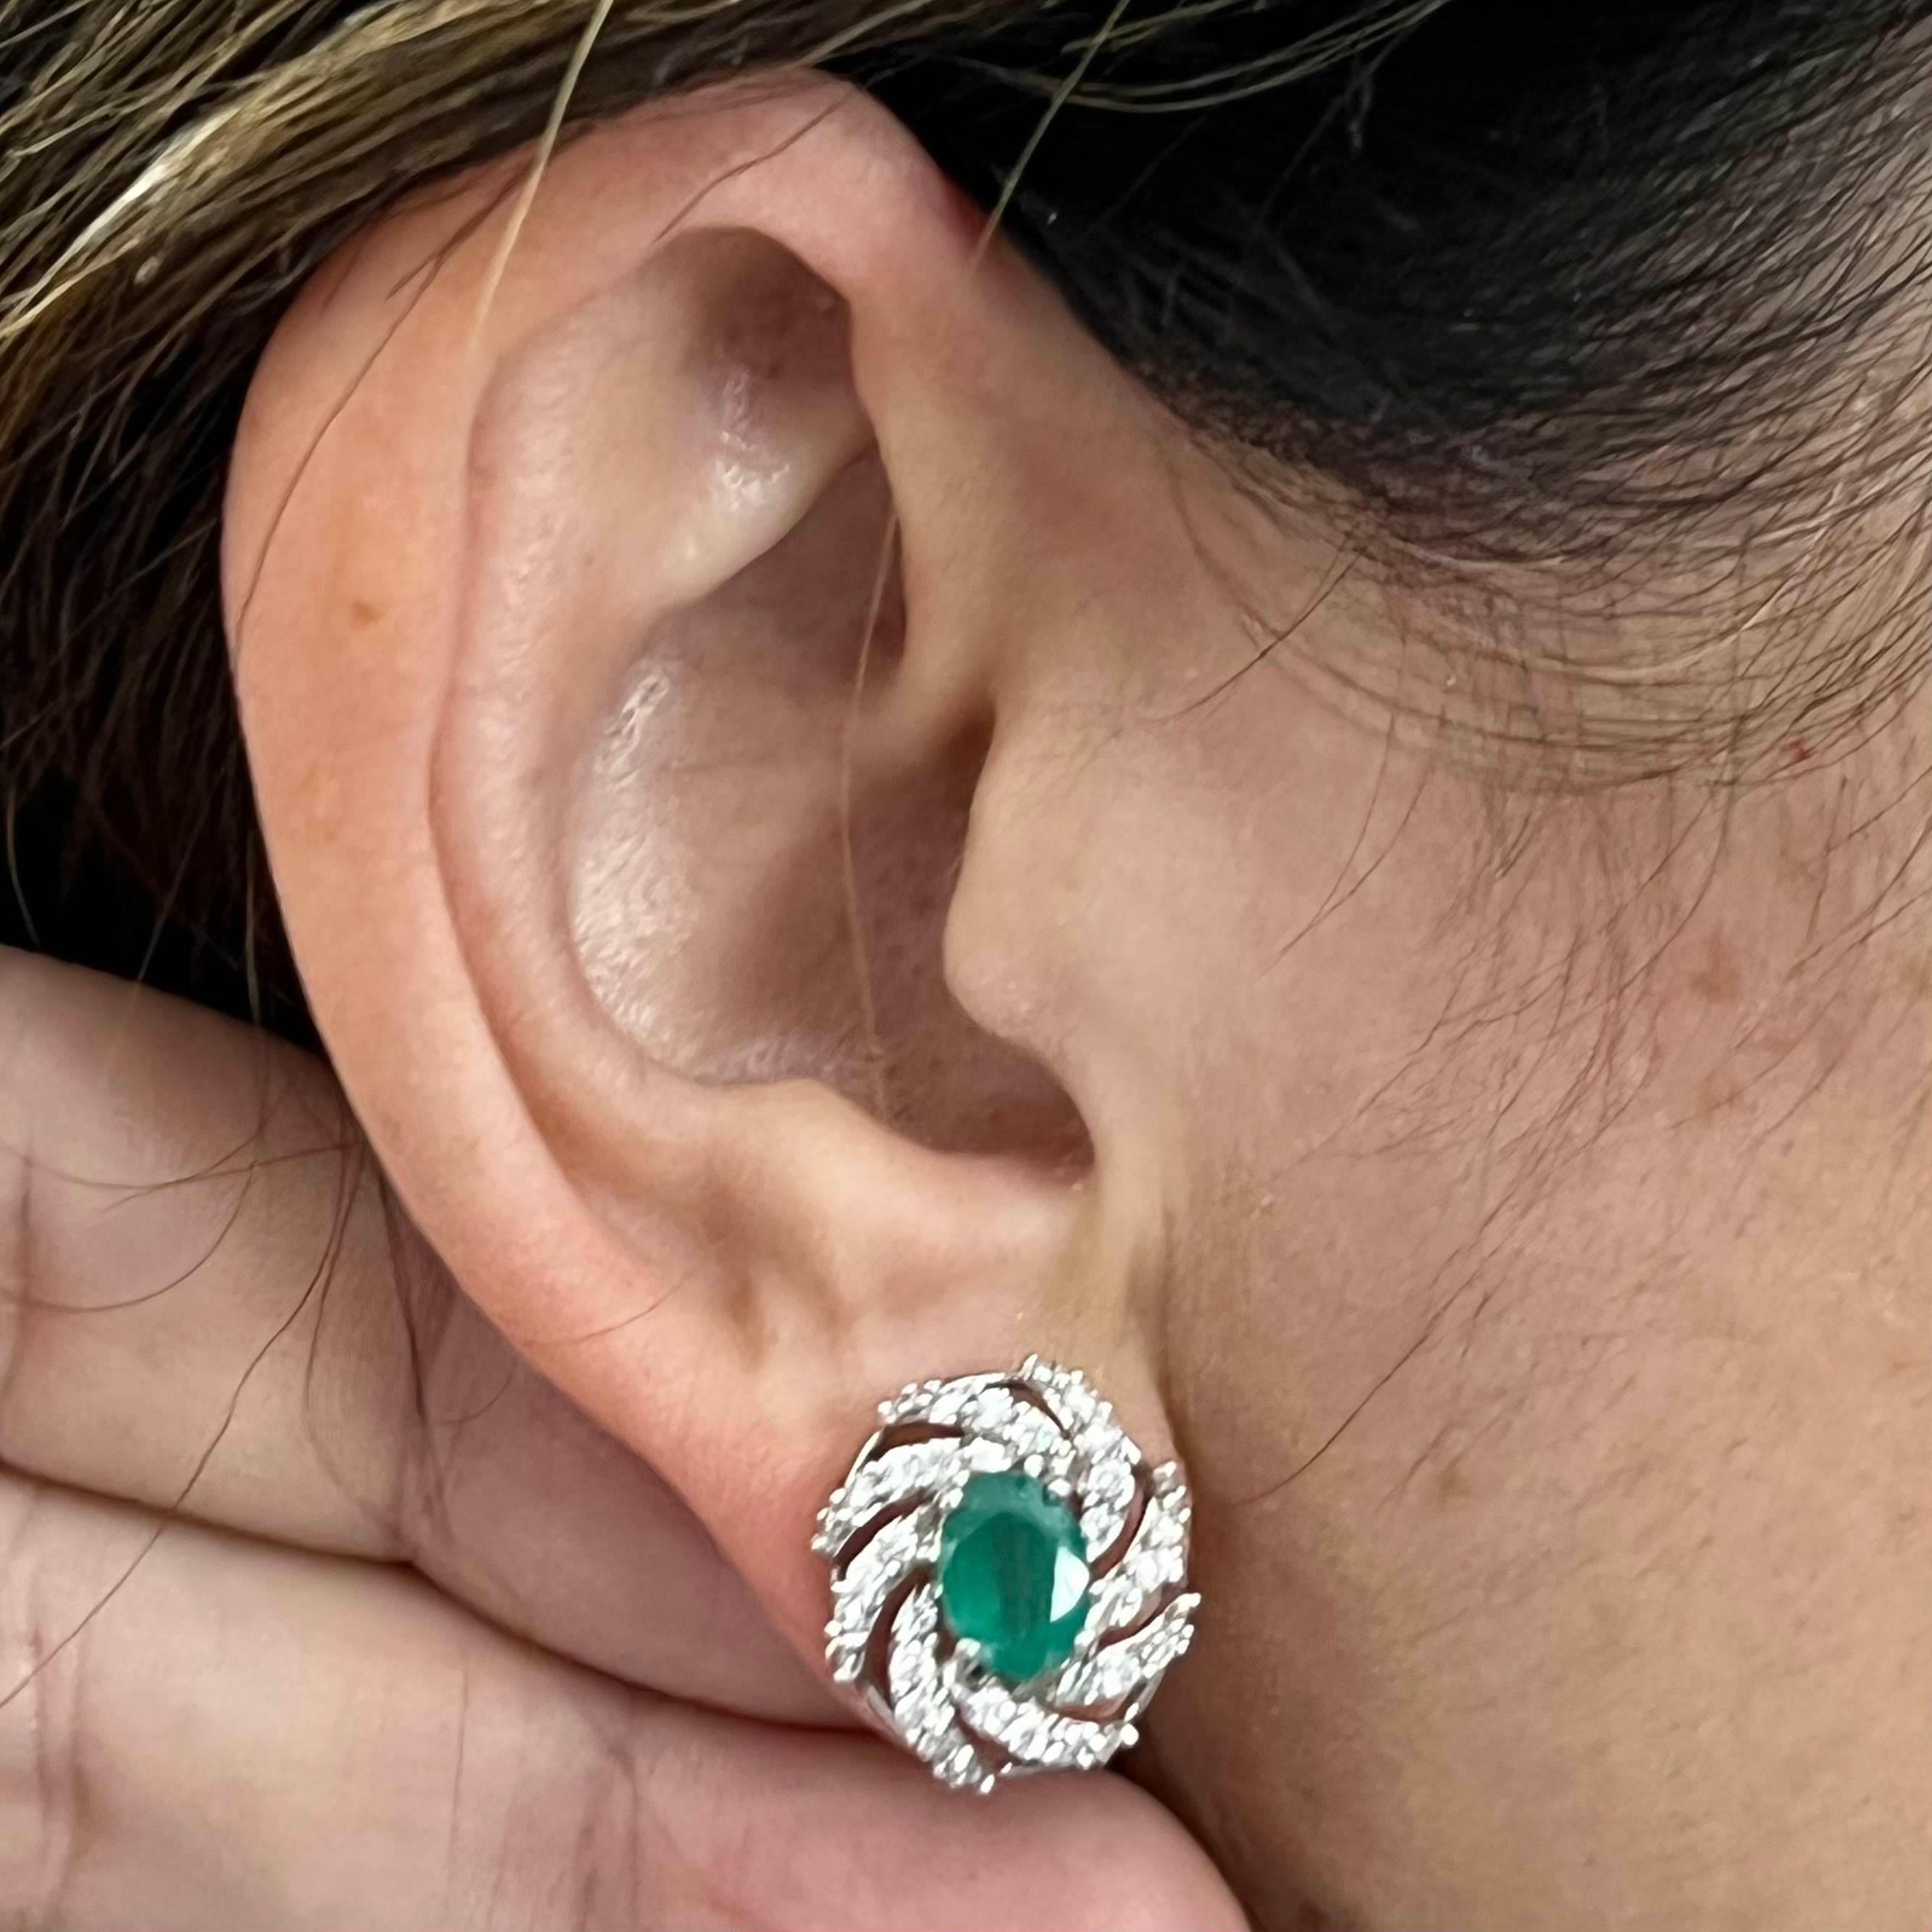 Natural Finely Faceted Quality Diamond Emerald Earrings 14k W Gold 4.05 TCW Certified $6,950 018690

This is one of Kind Unique Custom Made Glamorous Piece of Jewelry!

Nothing says, “I Love you” more than Diamonds and Pearls!

This item has been